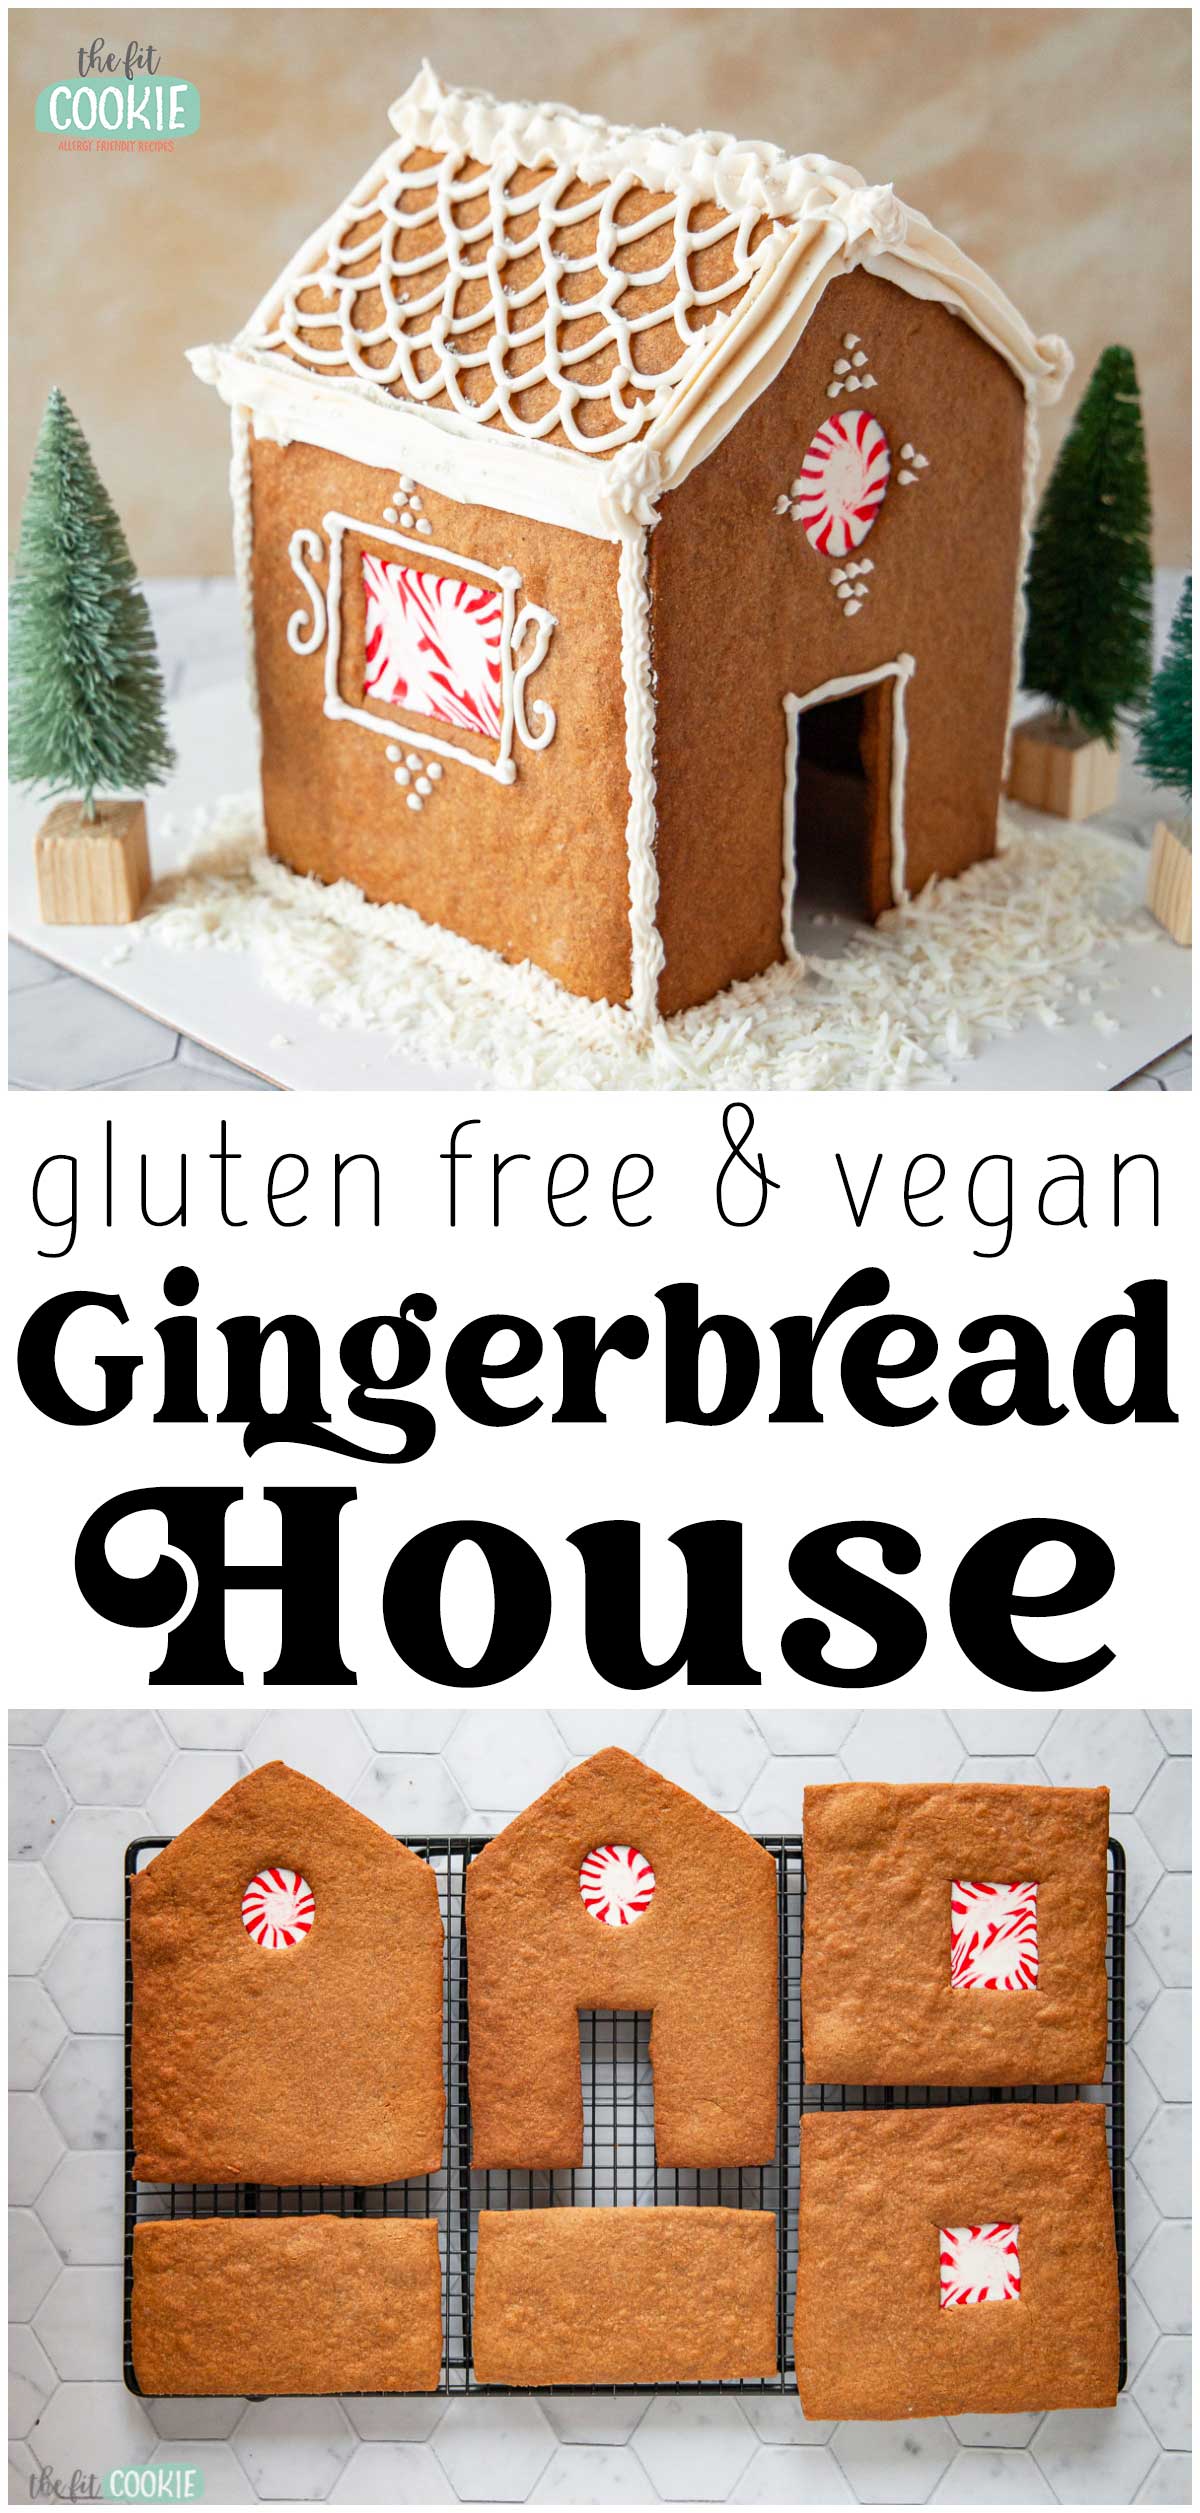 photo collage of gluten free gingerbread house and text